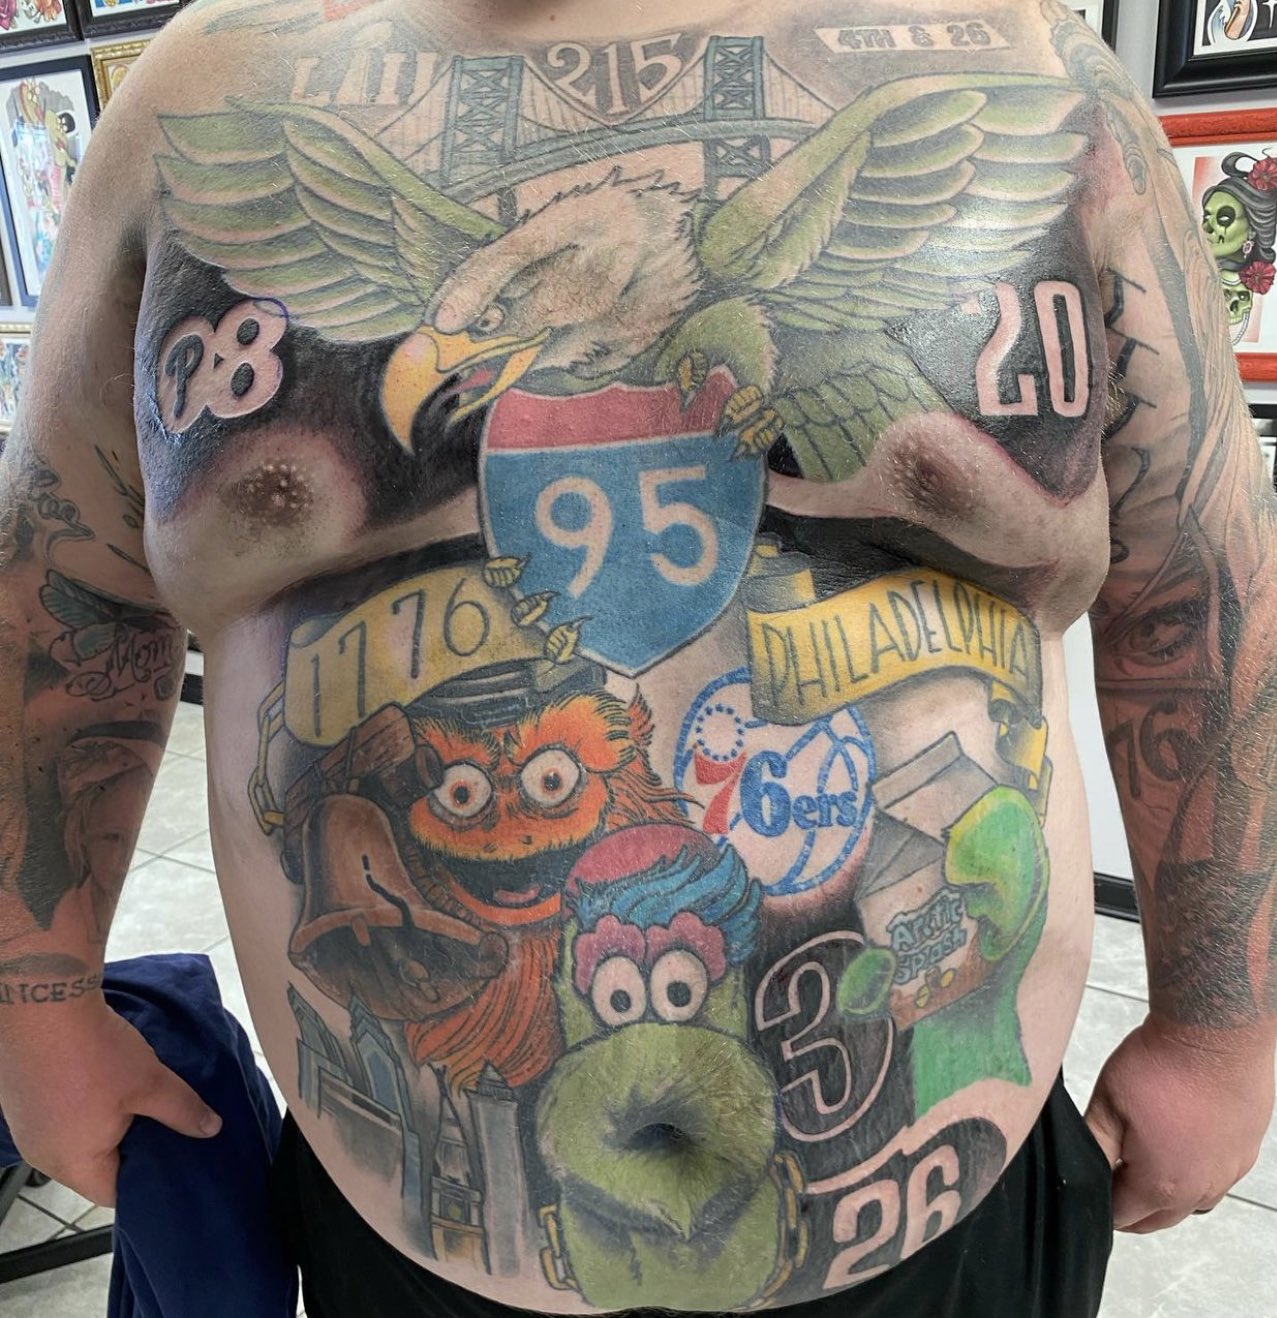 Tattooed Philly Sports Fan Kicked Out Of PhilliesYankees Game   Philadelphia PA Patch